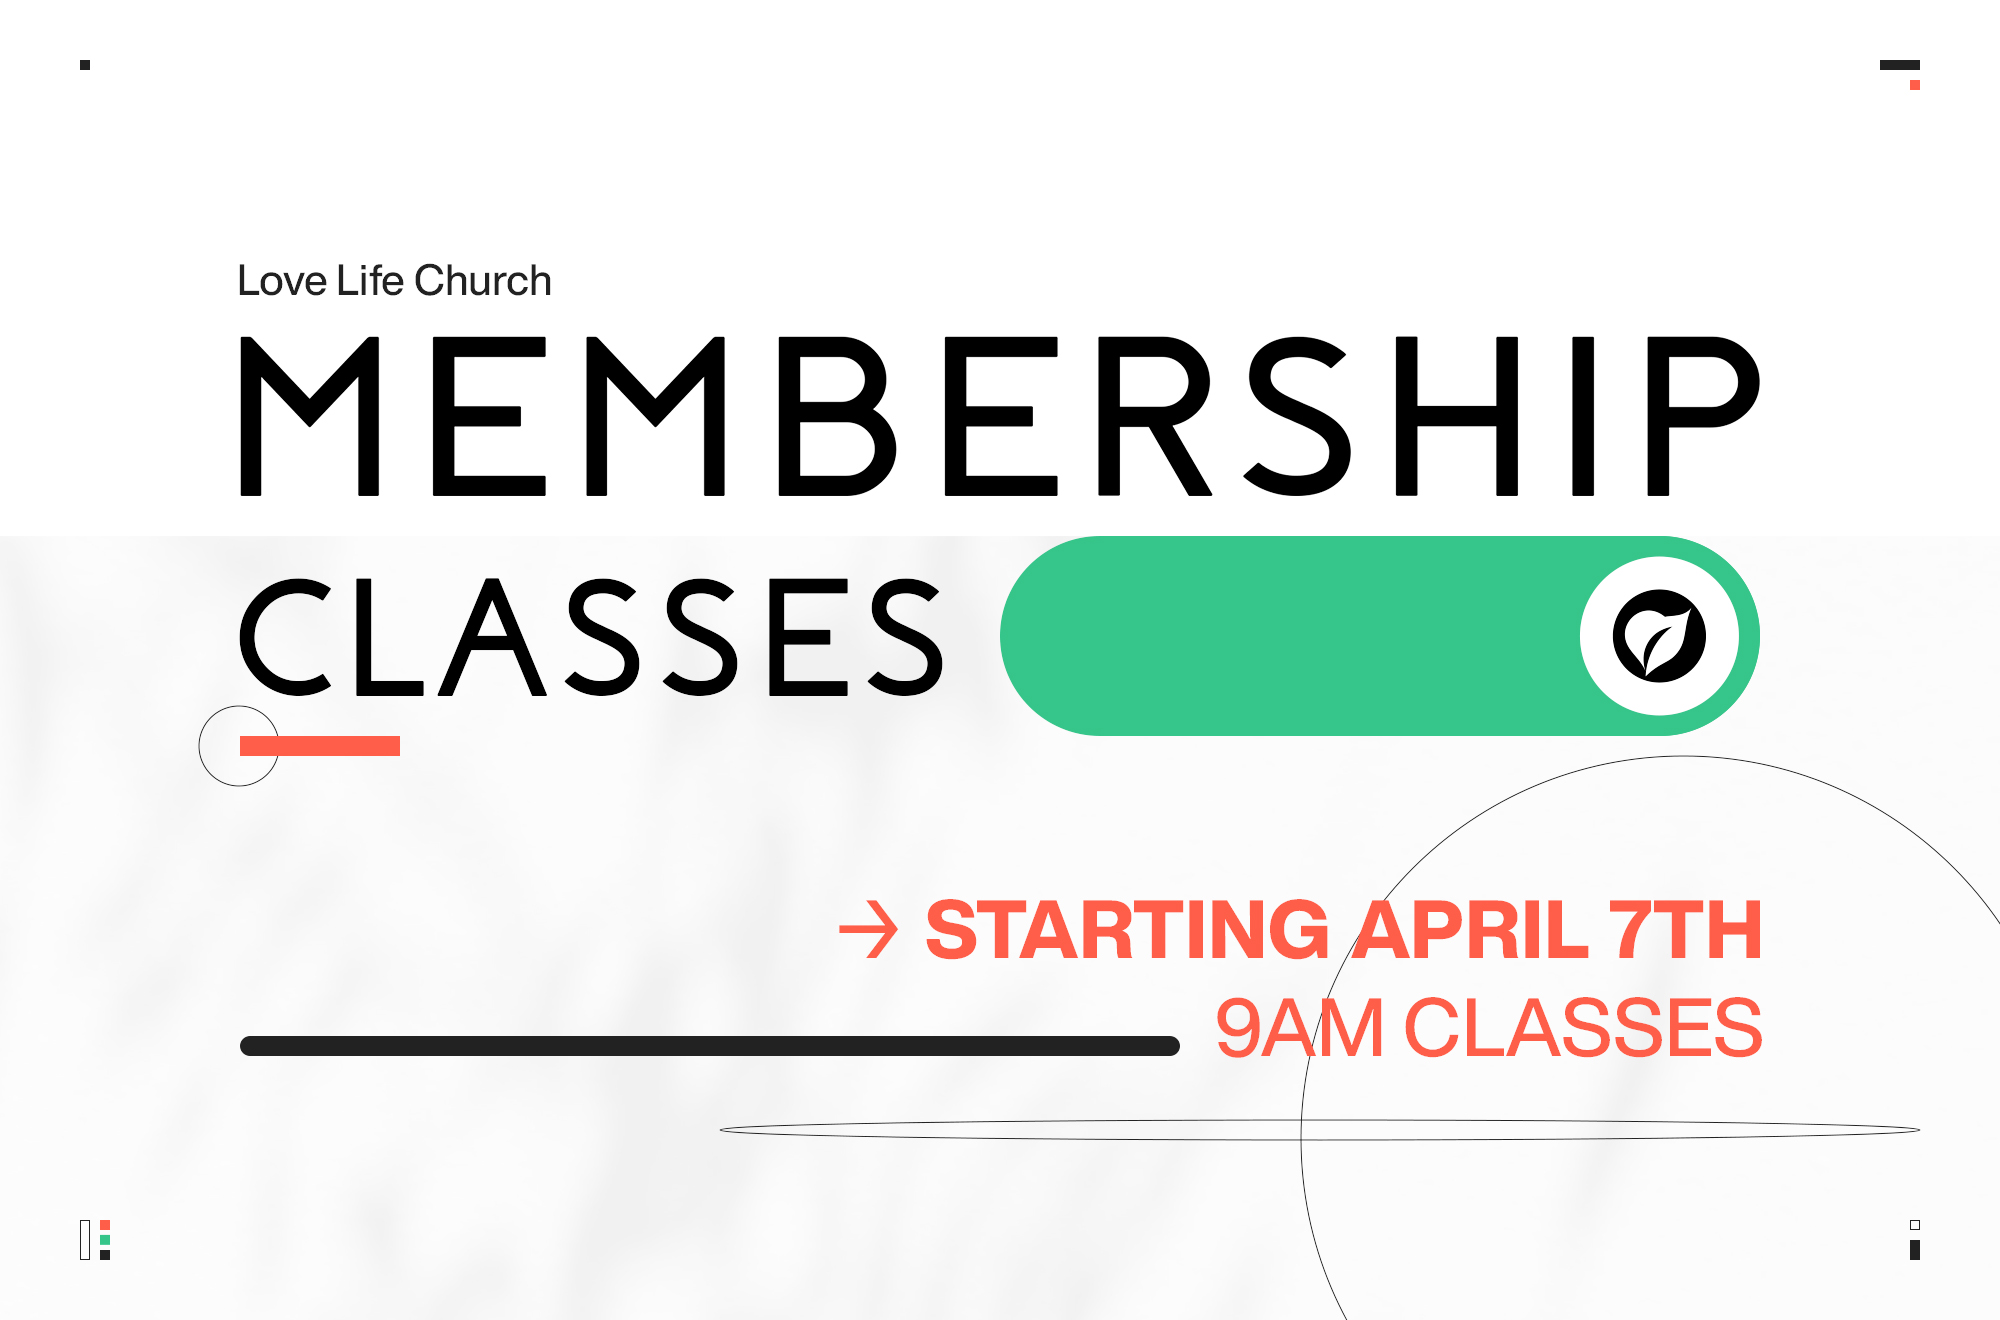 Become a member of Love Life Church! Sign up on-campus at Guest Services